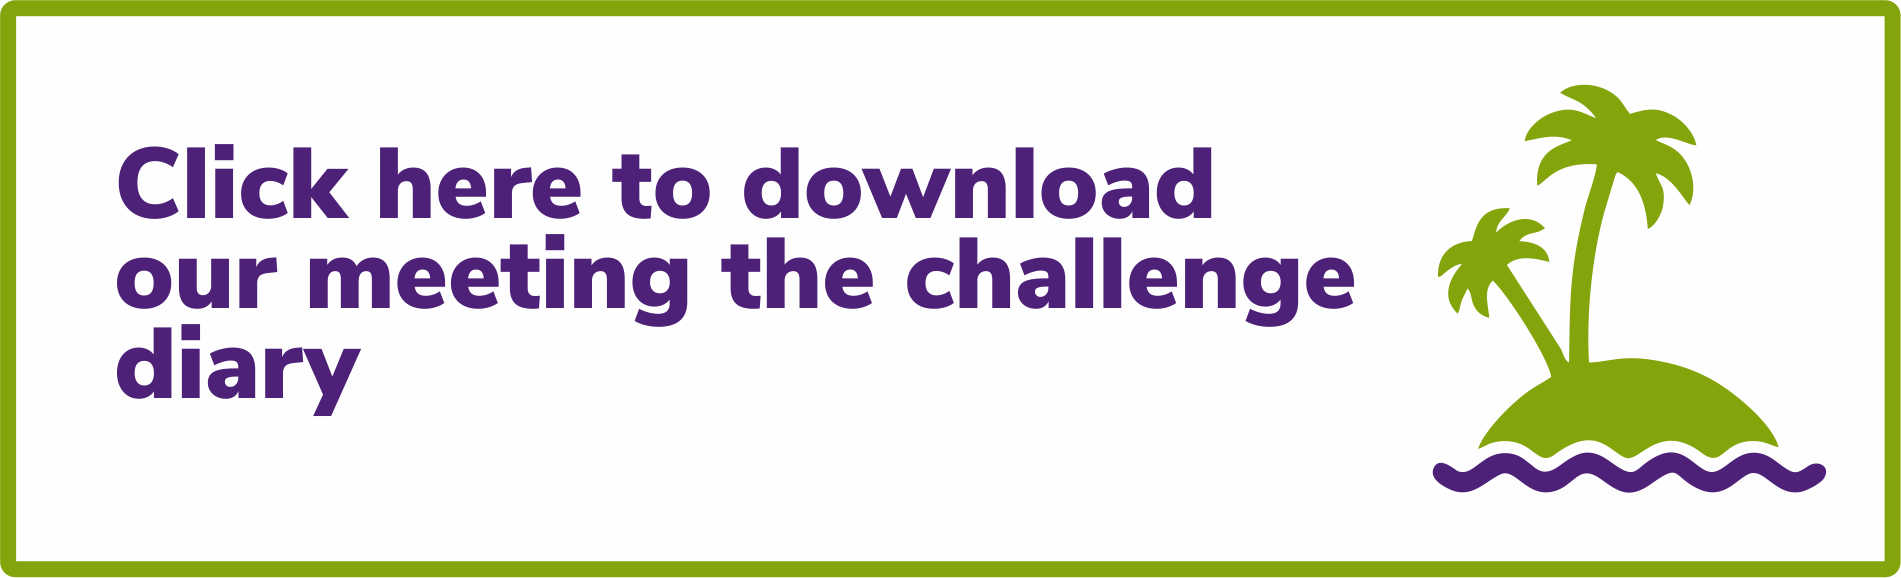 Click here to download our meeting the challenge diary